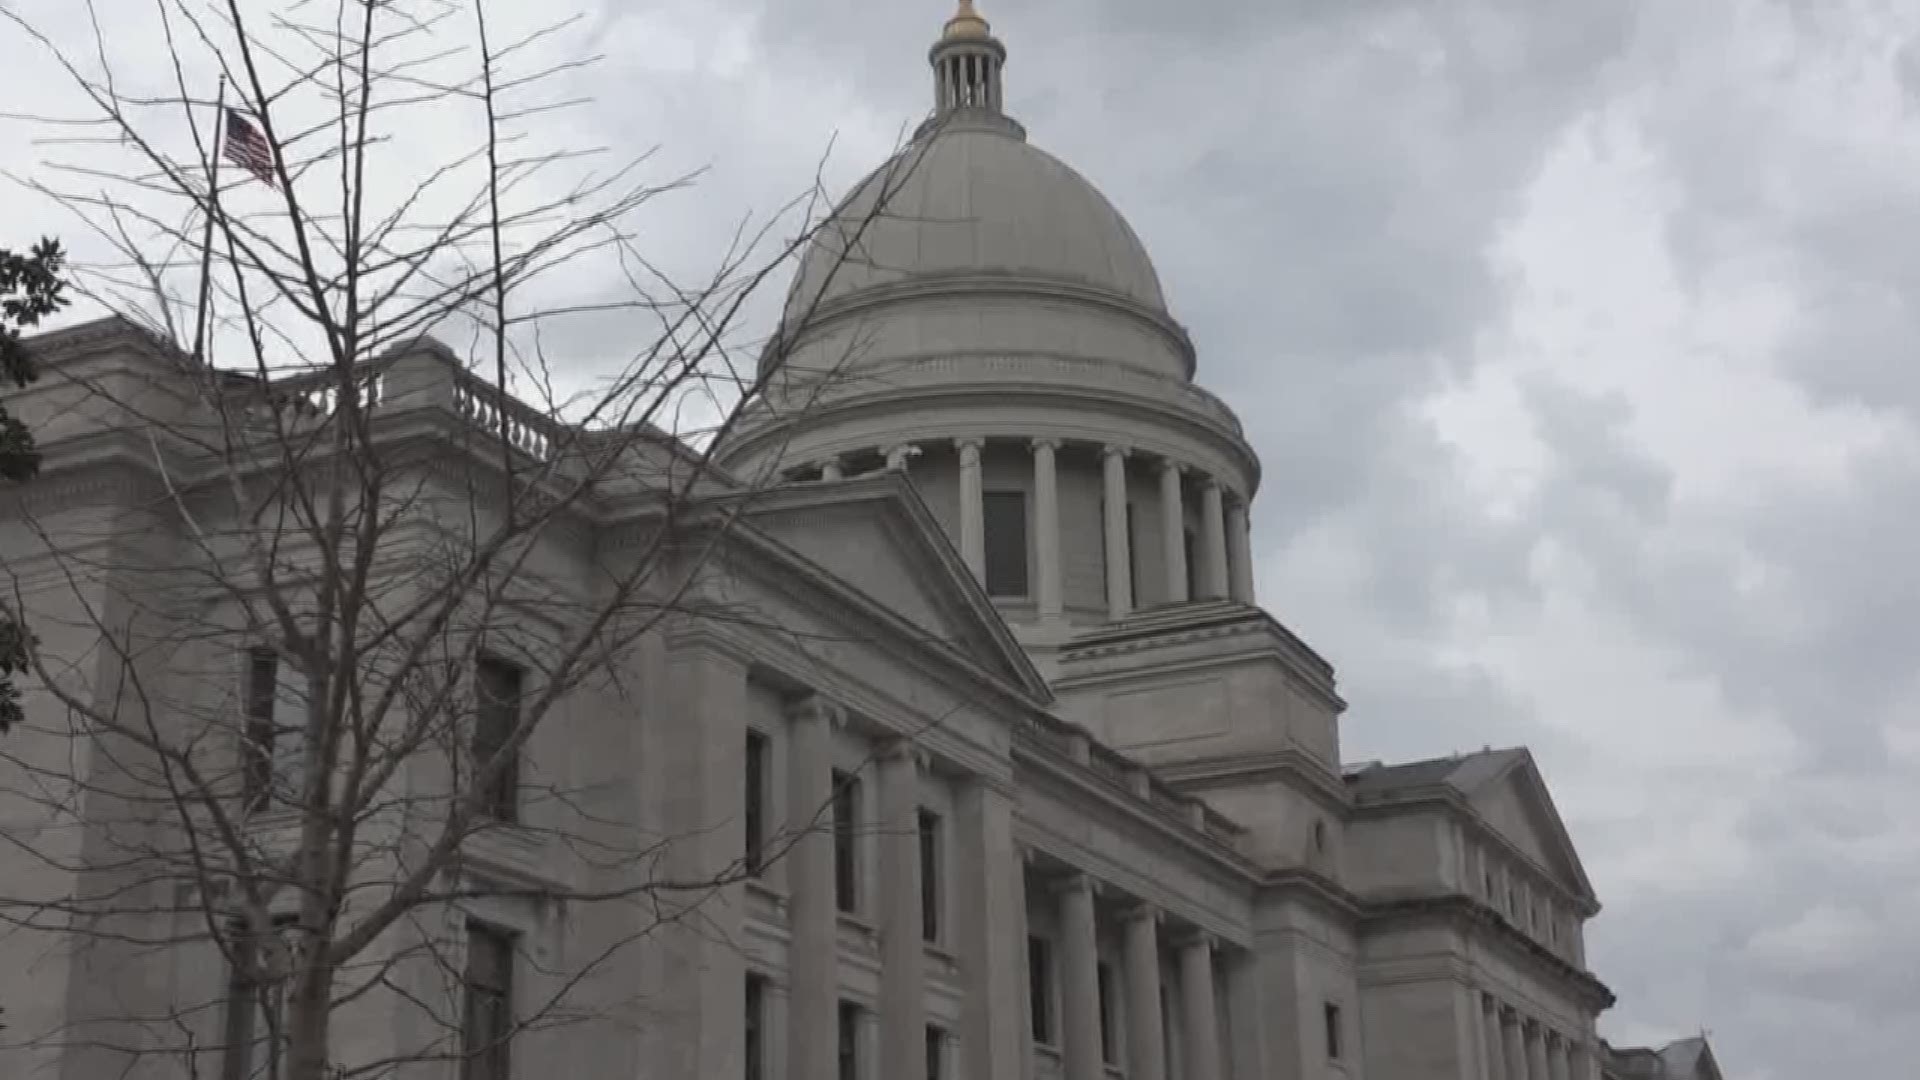 Governor Asa Hutchinson revealed his proposal for Arkansas' 2019 budget.